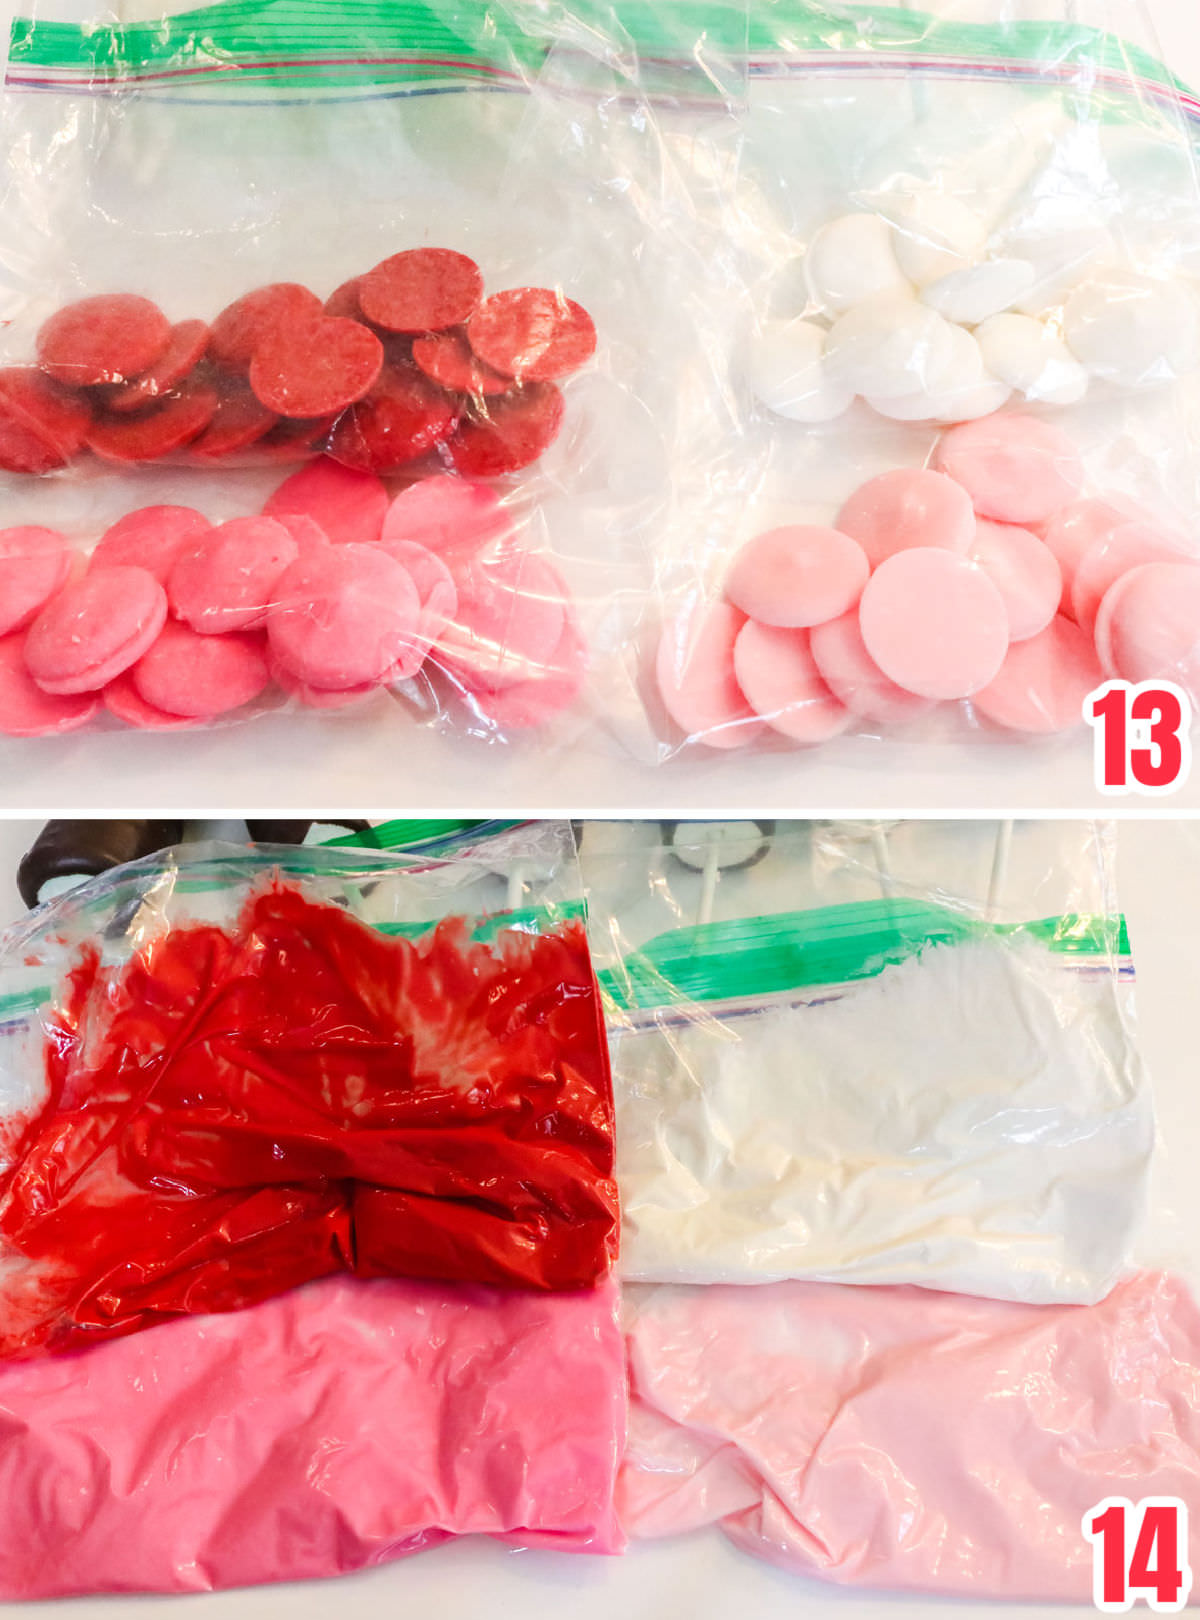 Collage image showing how to melt candy melts in plastic baggies to use for decorating marshmallow pops.